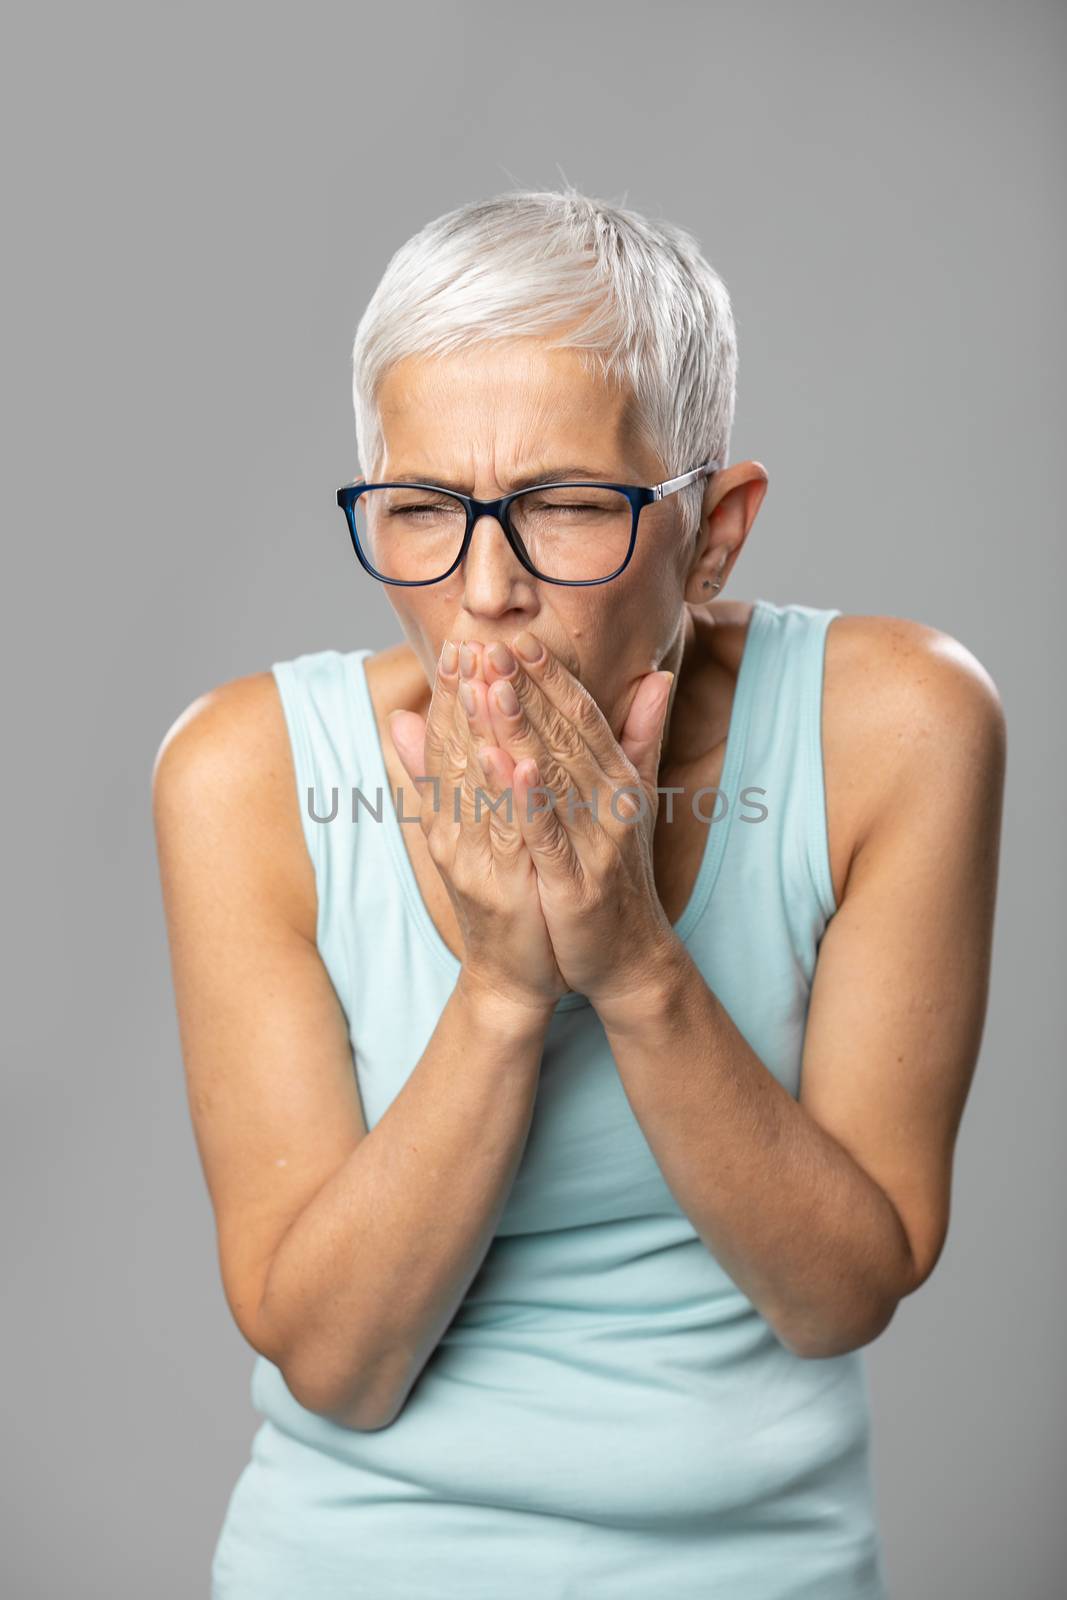 Senior women with glasses and short gray hair coughs and sneezes into a handkerchief, studio shoot, allergies and illness concept